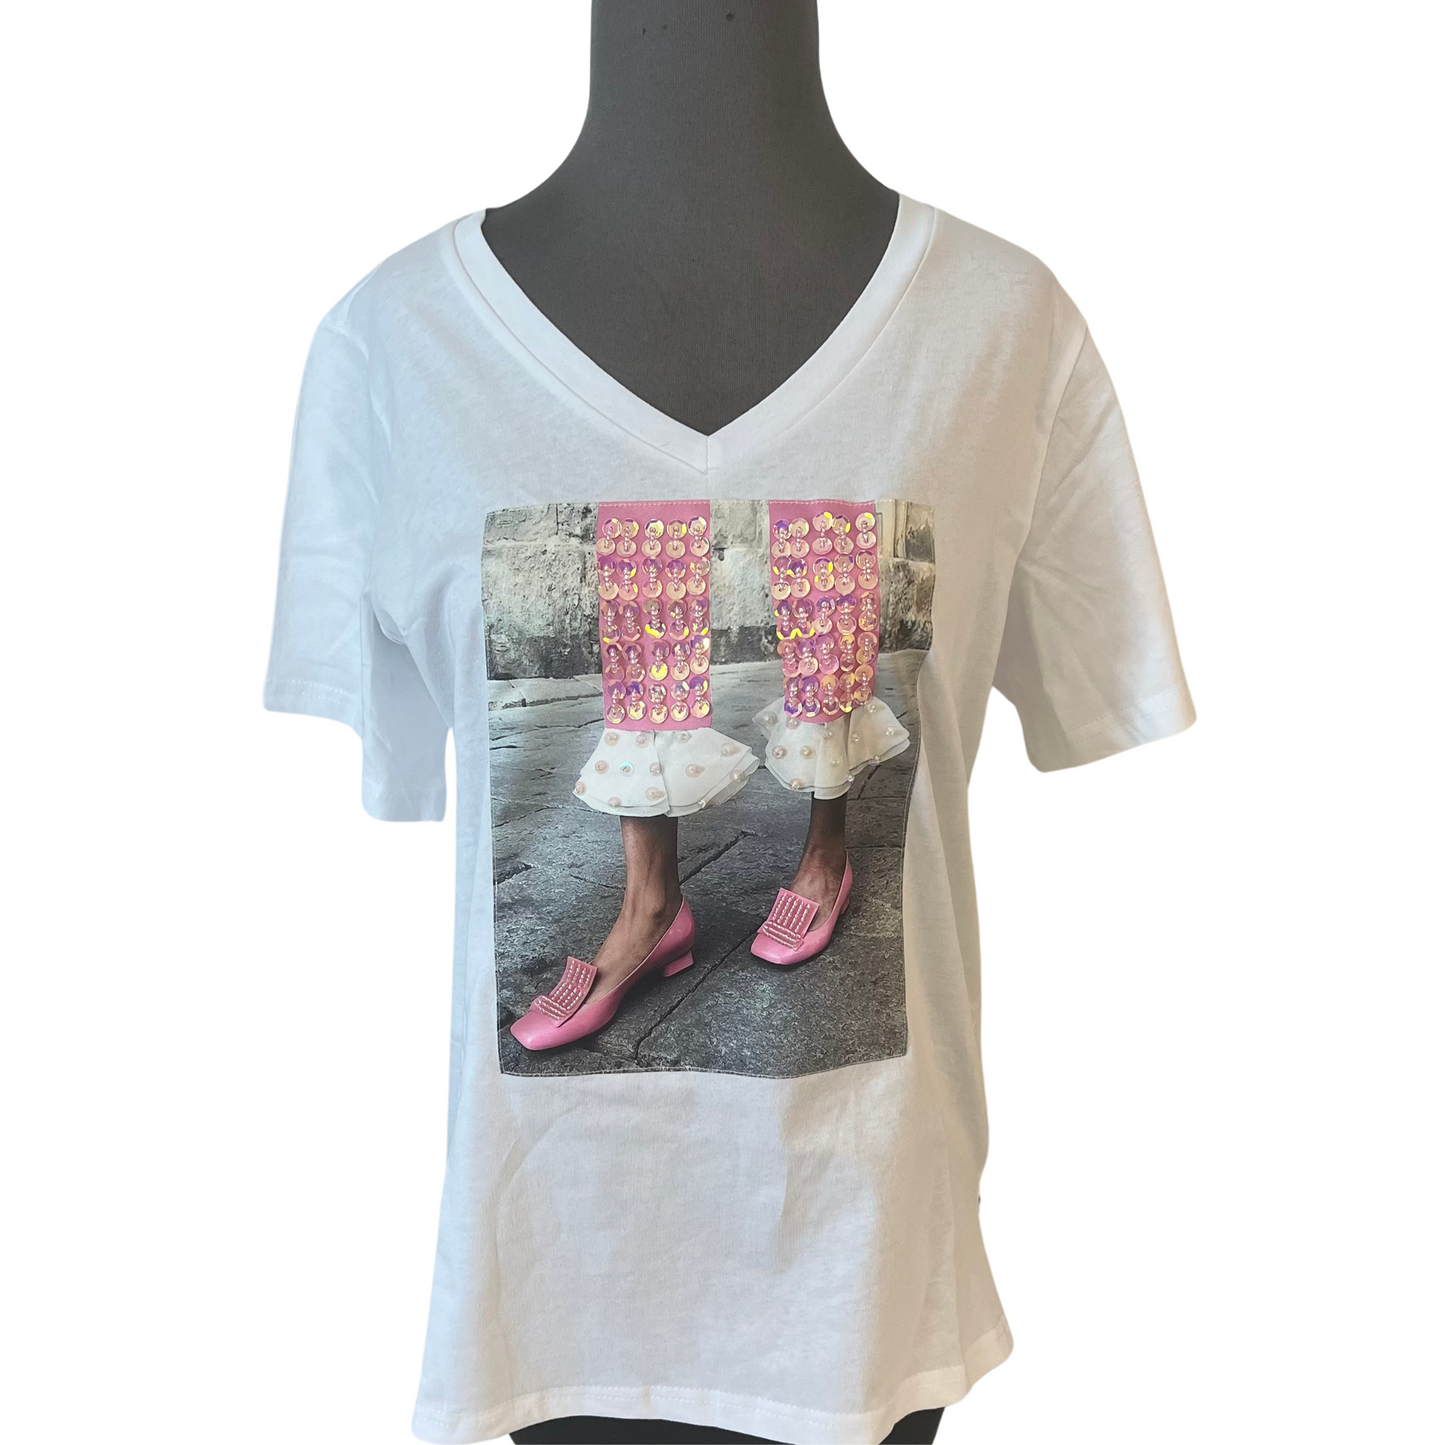 V-Neck bejeweled graphic tee in white with pink sequin accents